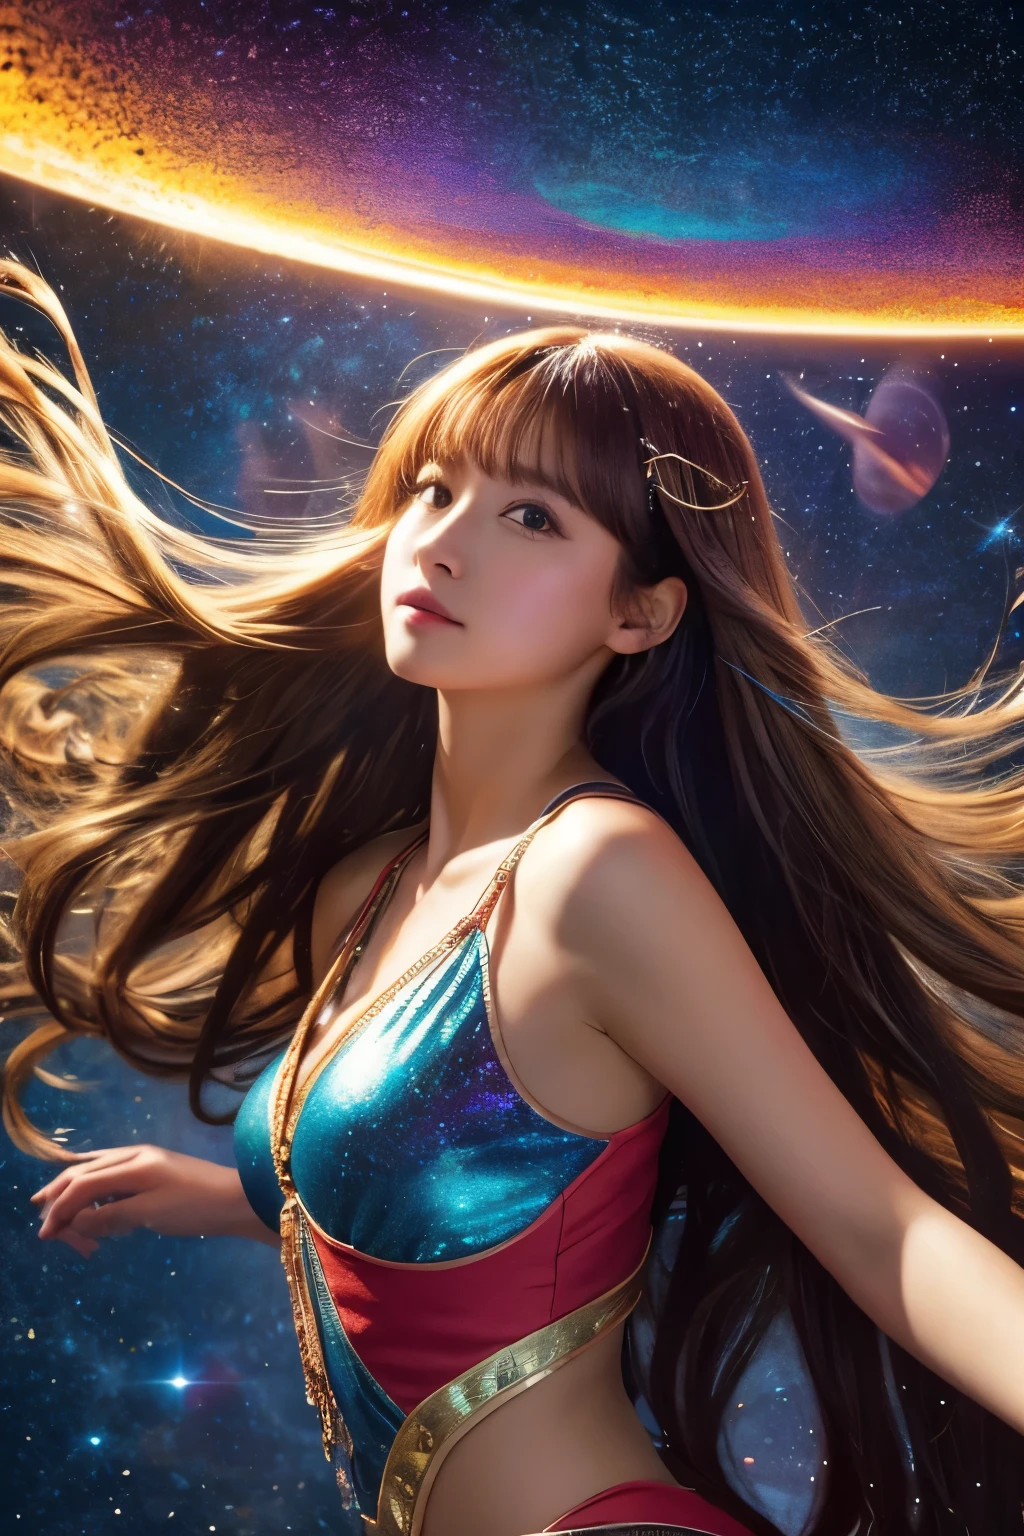 High quality, Best Quality, masutepiece, Detailed portrait of a woman 1 girl, Long hair, (floating, spaces, Galaxy, Colorful), Warm lighting, Goddess, Galaxy, Scenery, Multicolored corollas of hair, {{{Best Quality}}}, {{Ultra-detailed}}, {Illustration}, Cinematic Angle, {Detailed light},Cinematic lighting, celestial, Dynamic Pose